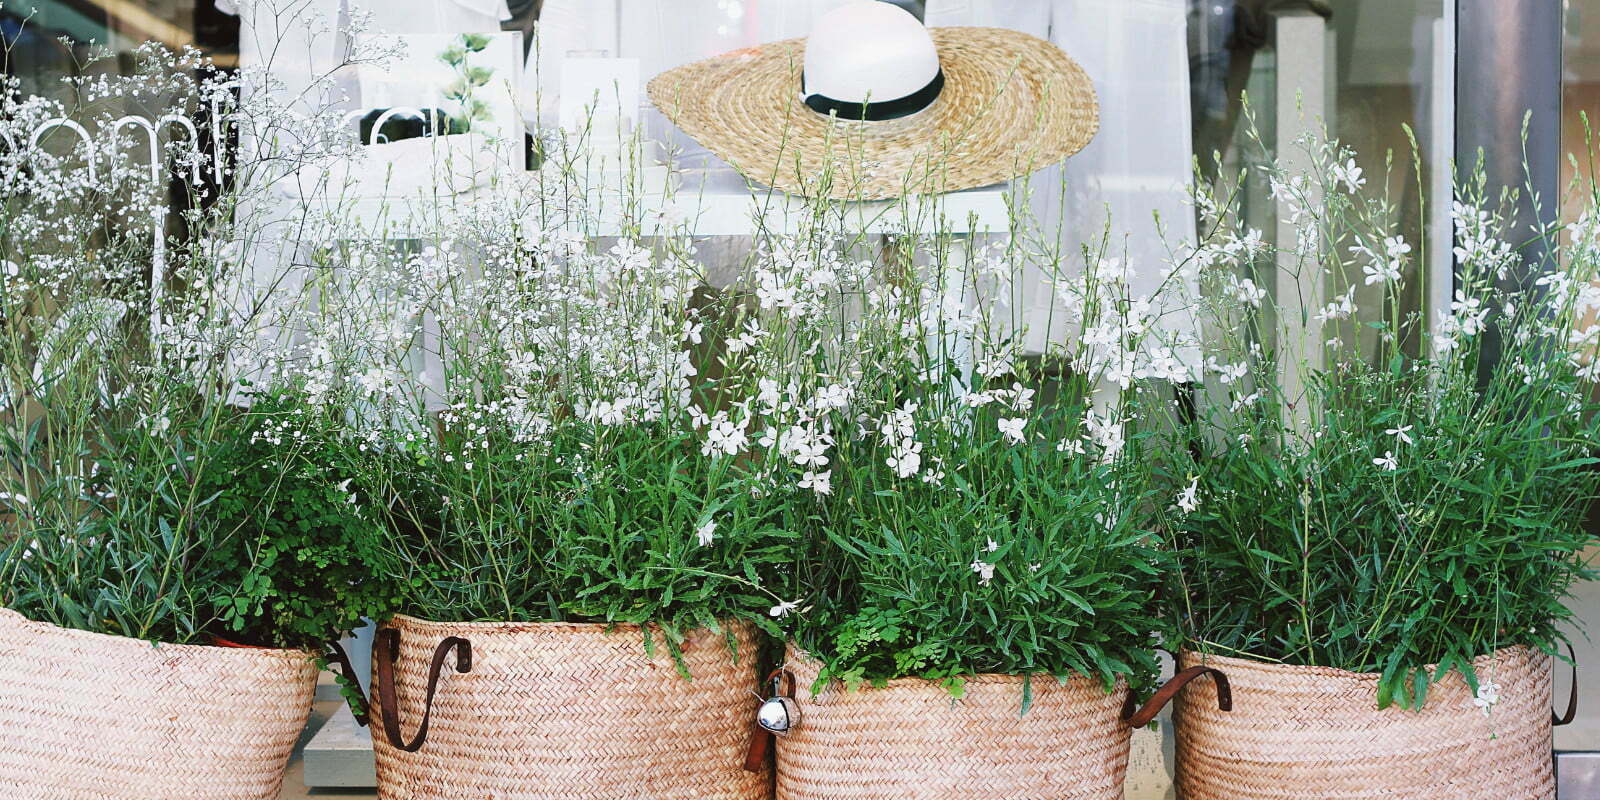 Cane baskets with white flowering plants in fromt of a shop window featureing ladies dresses and hats.